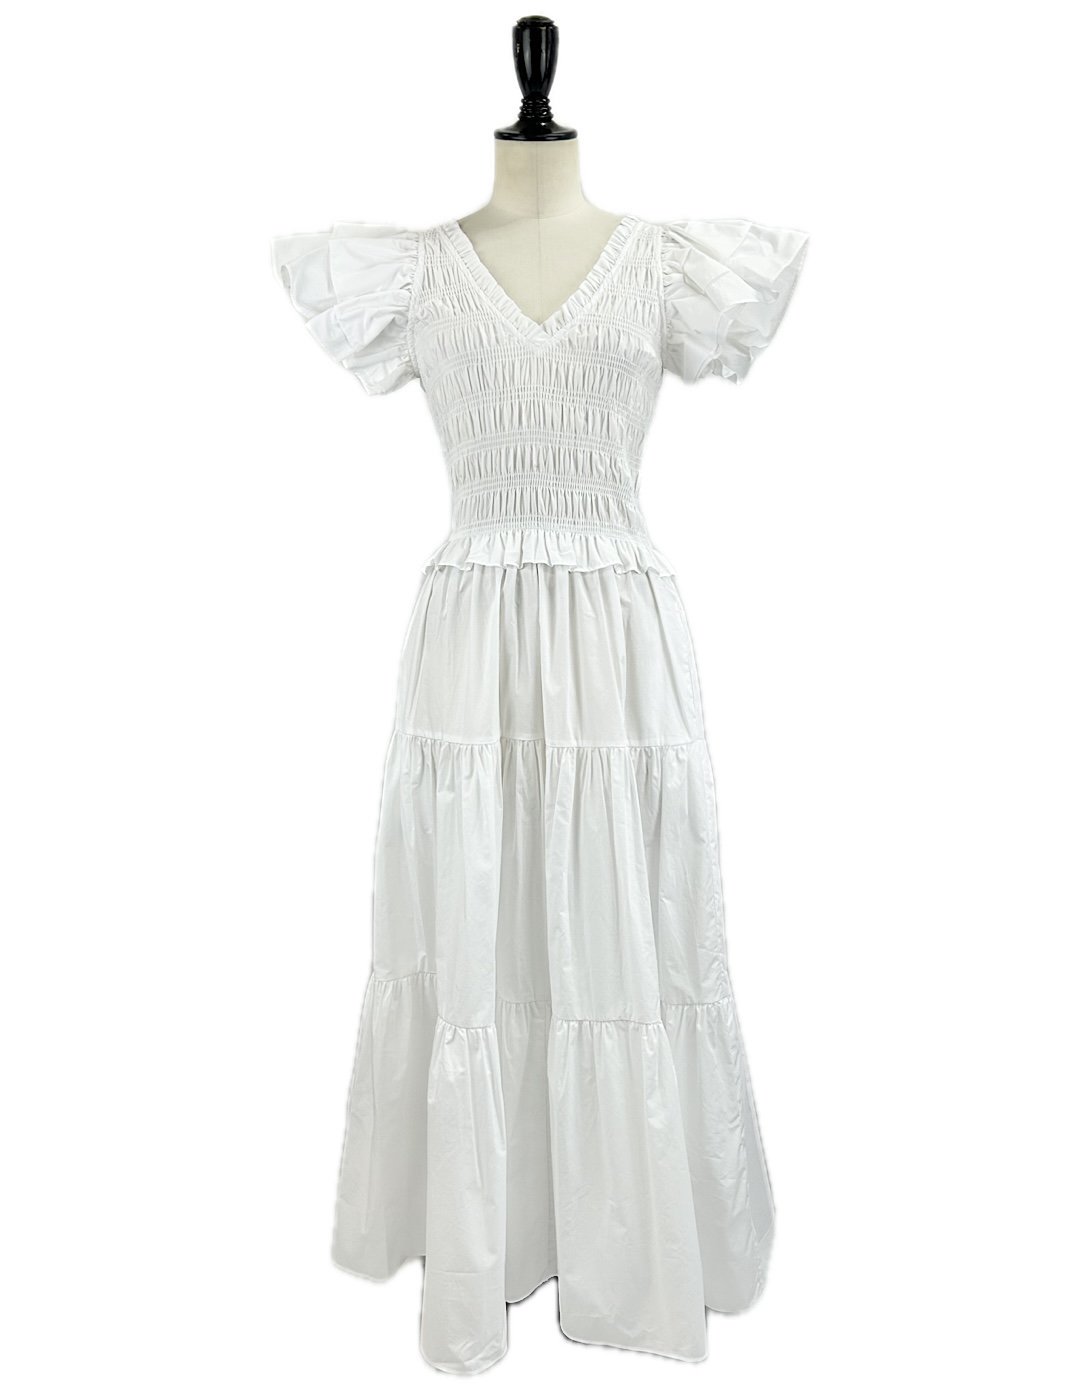 <img class='new_mark_img1' src='https://img.shop-pro.jp/img/new/icons6.gif' style='border:none;display:inline;margin:0px;padding:0px;width:auto;' />MEIMEIJ / COTTON LONG DRESS